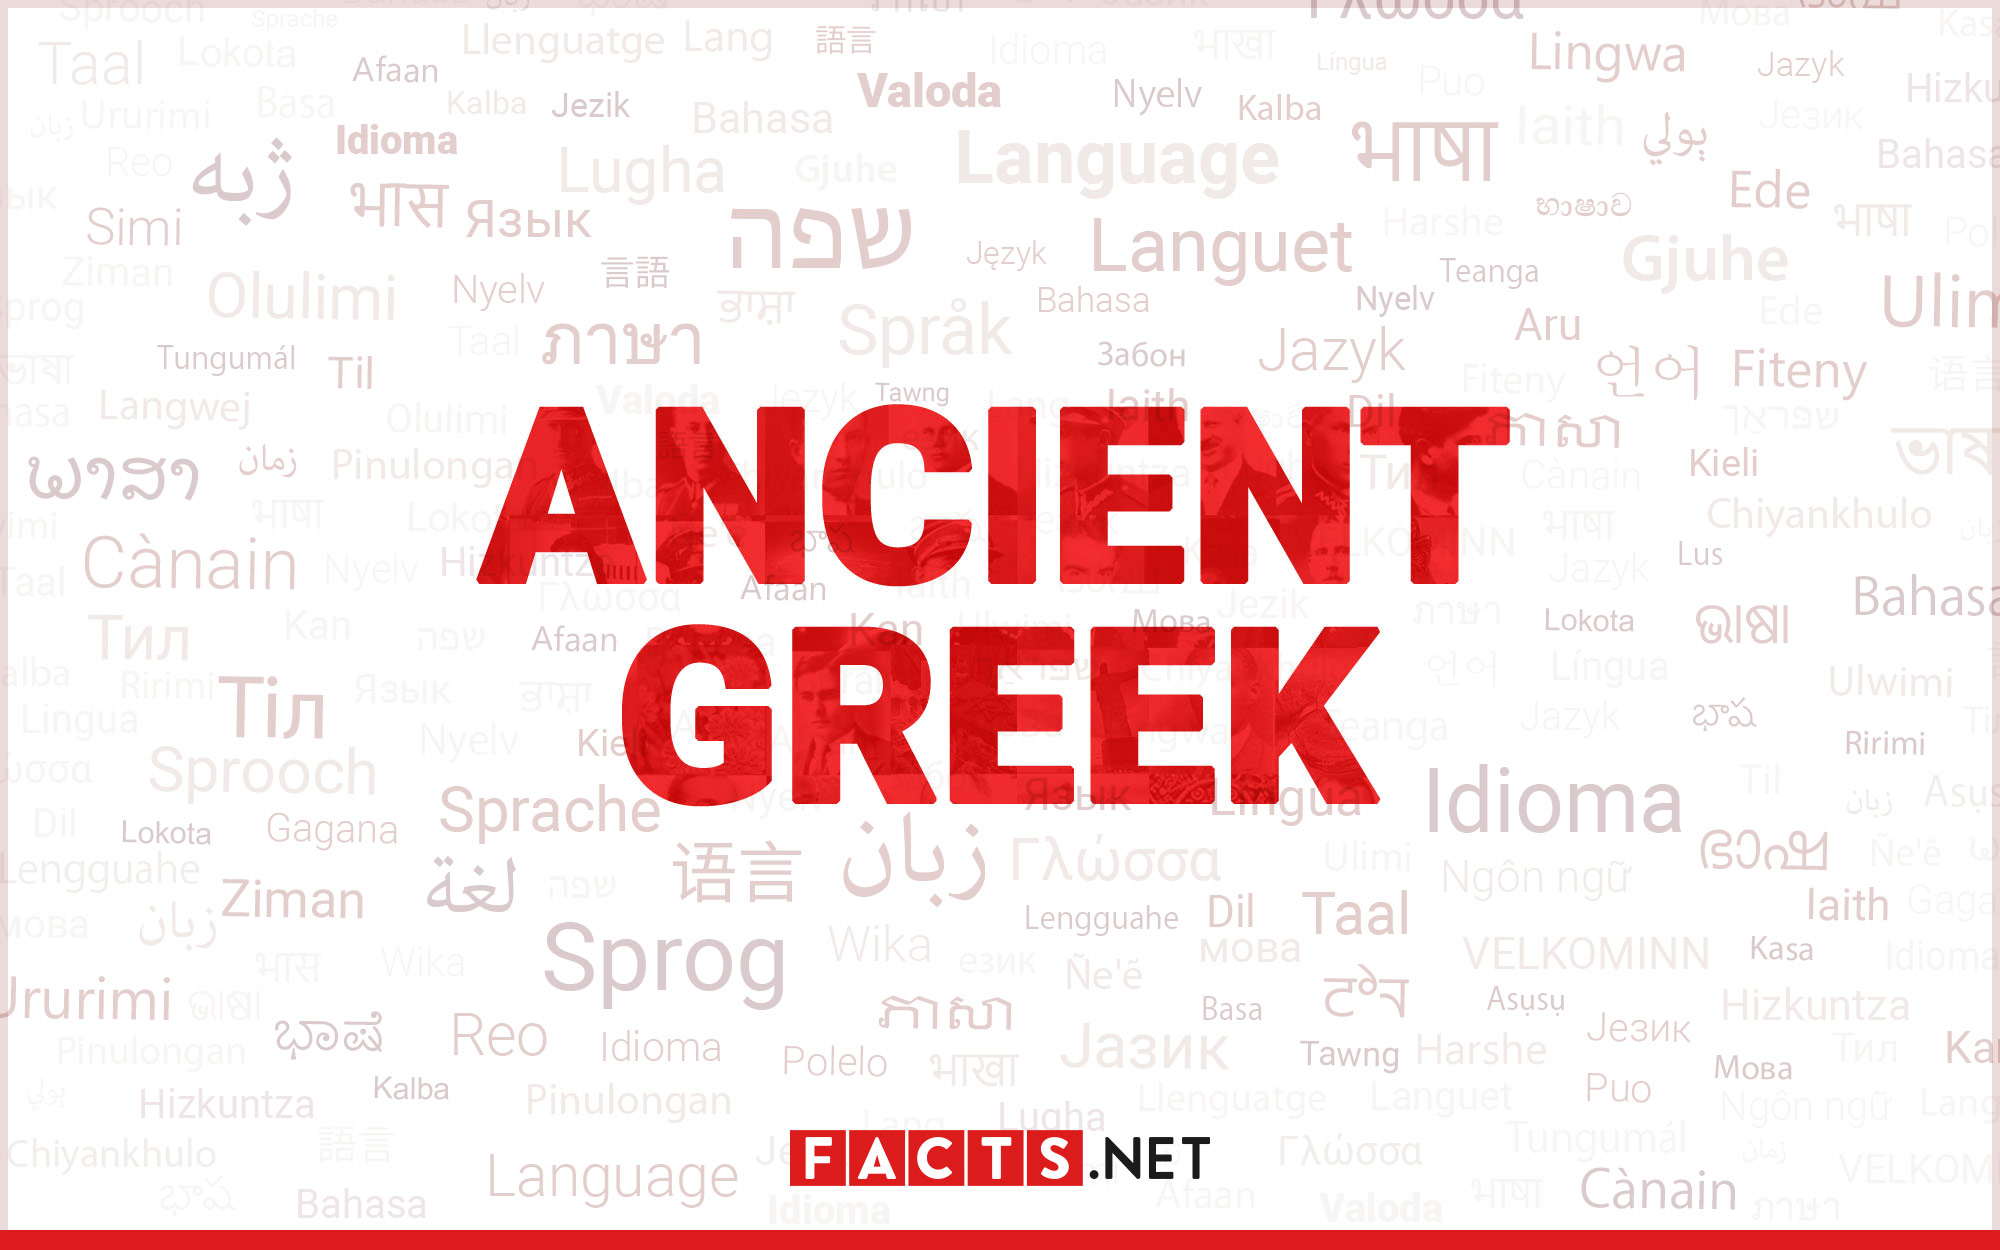 16-astonishing-facts-about-ancient-greek-language